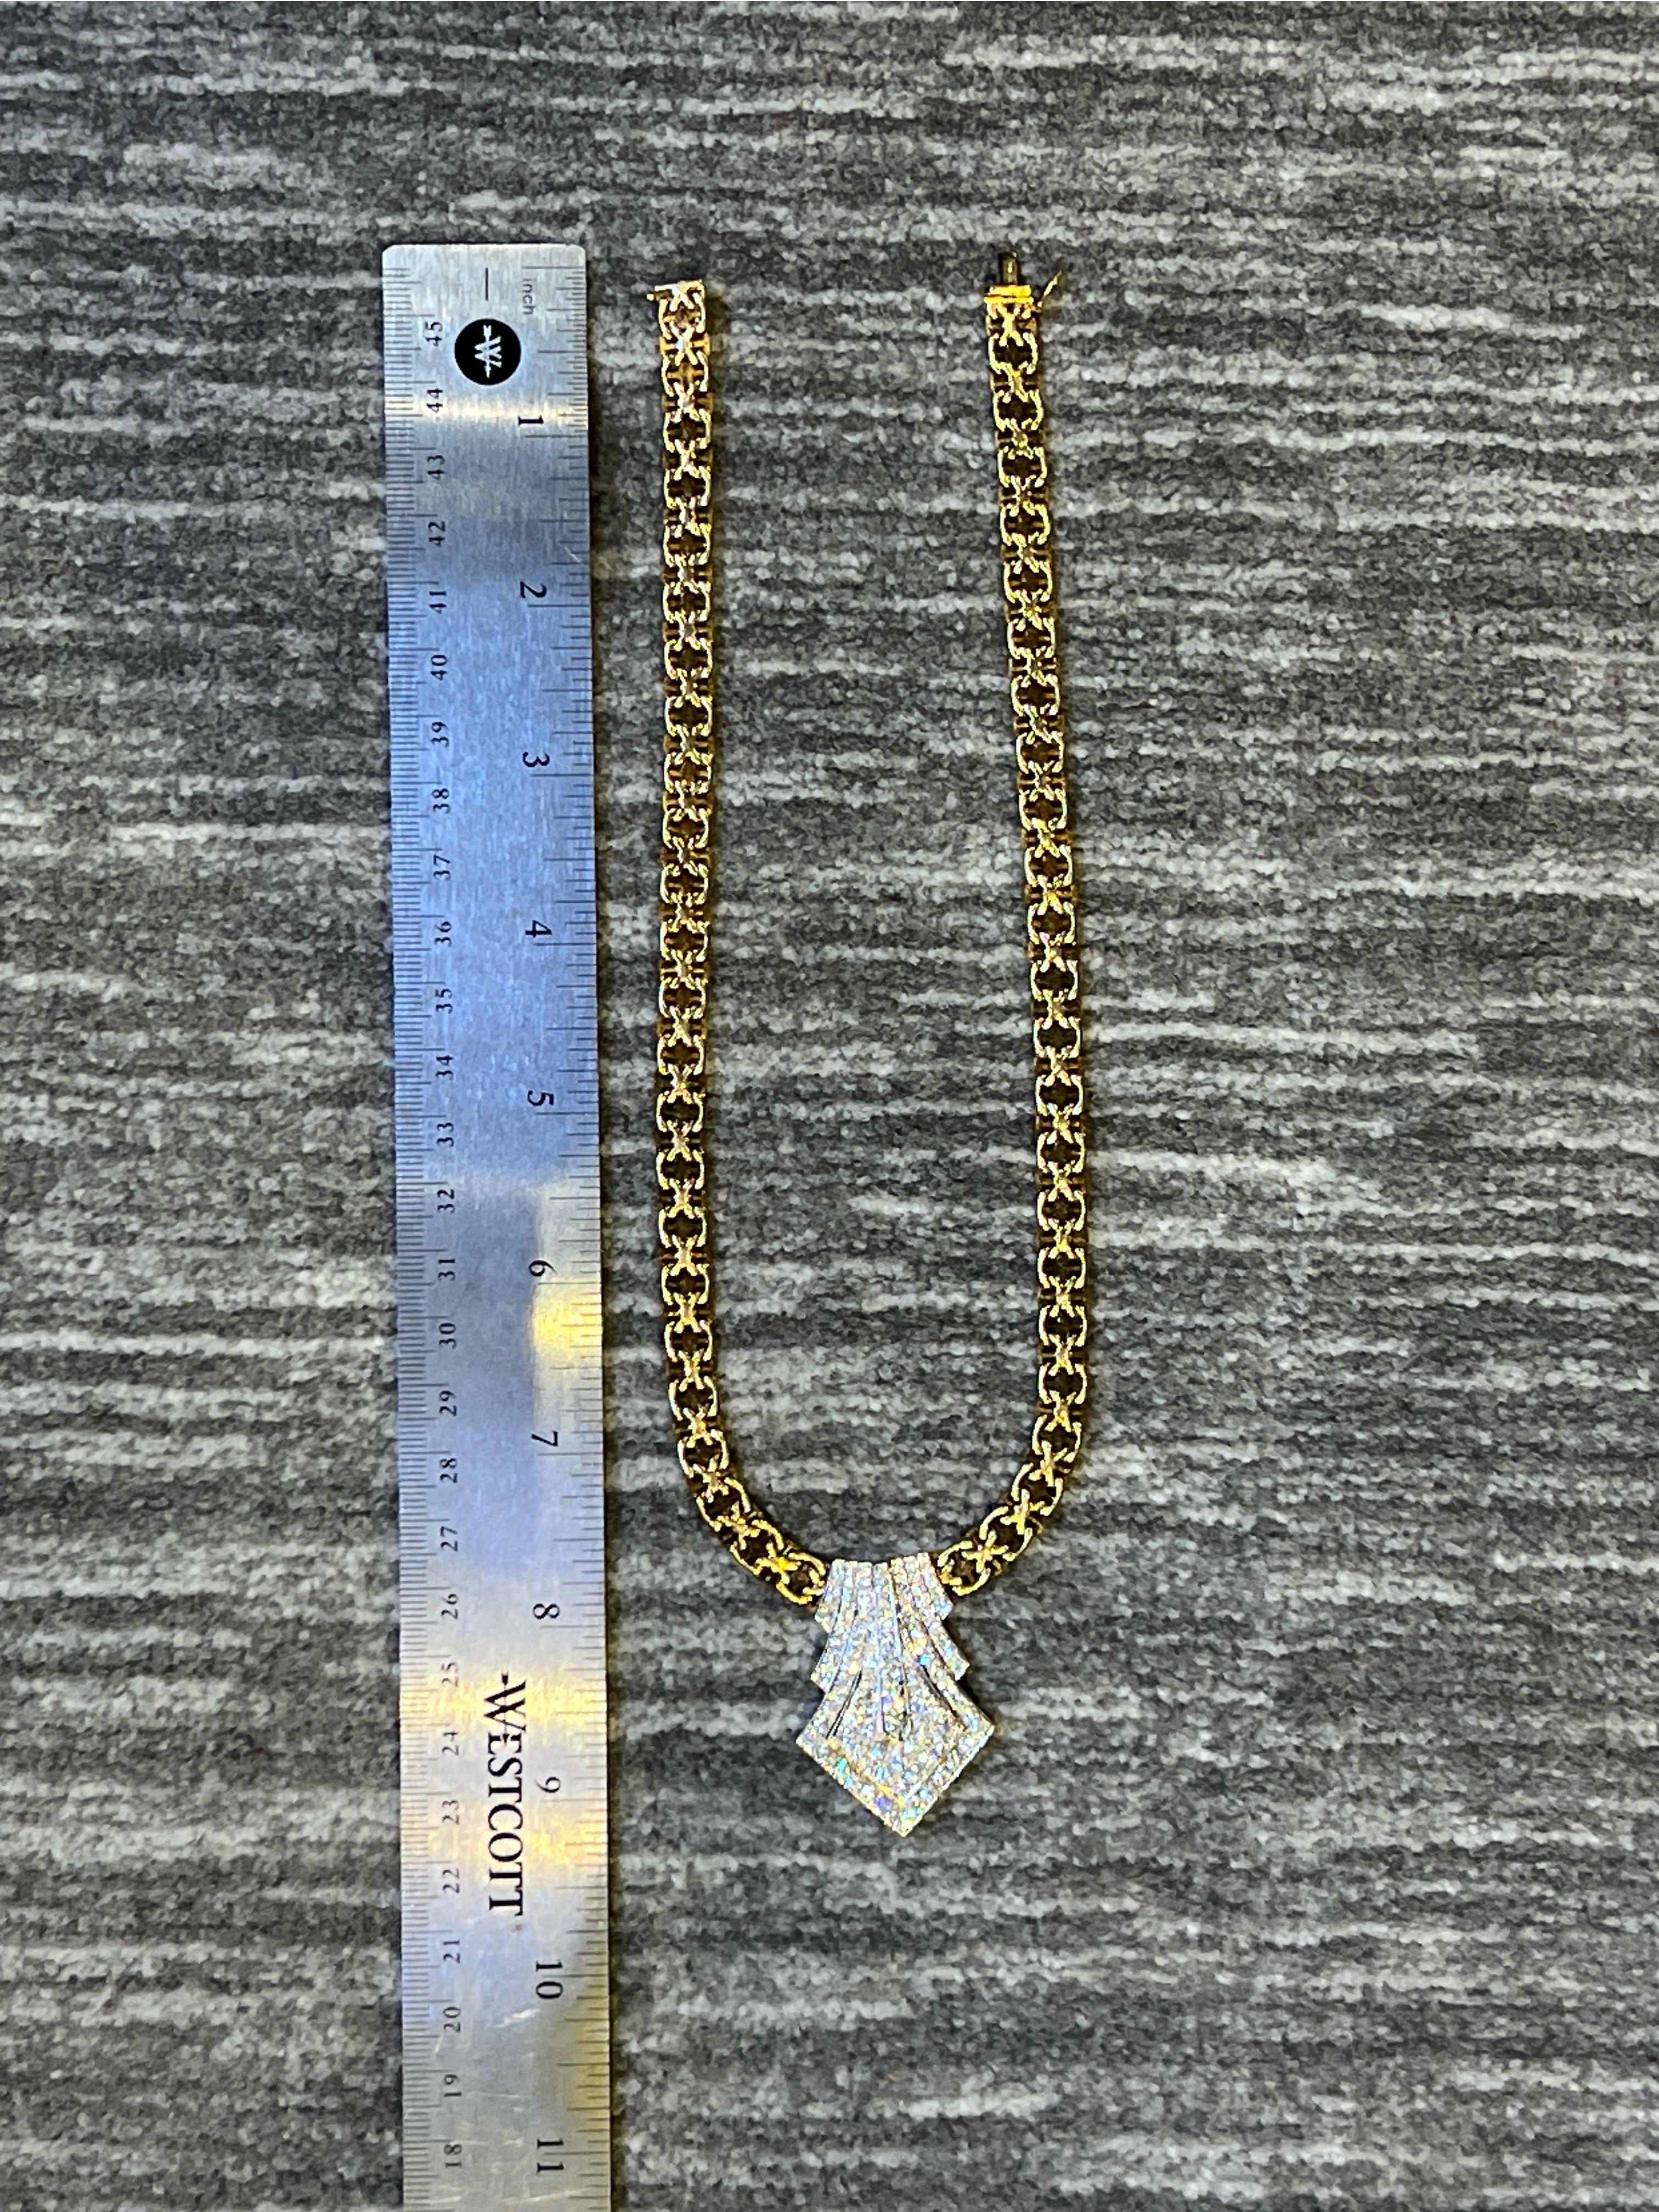 Diamond Pendant Necklace  In Excellent Condition For Sale In New York, NY